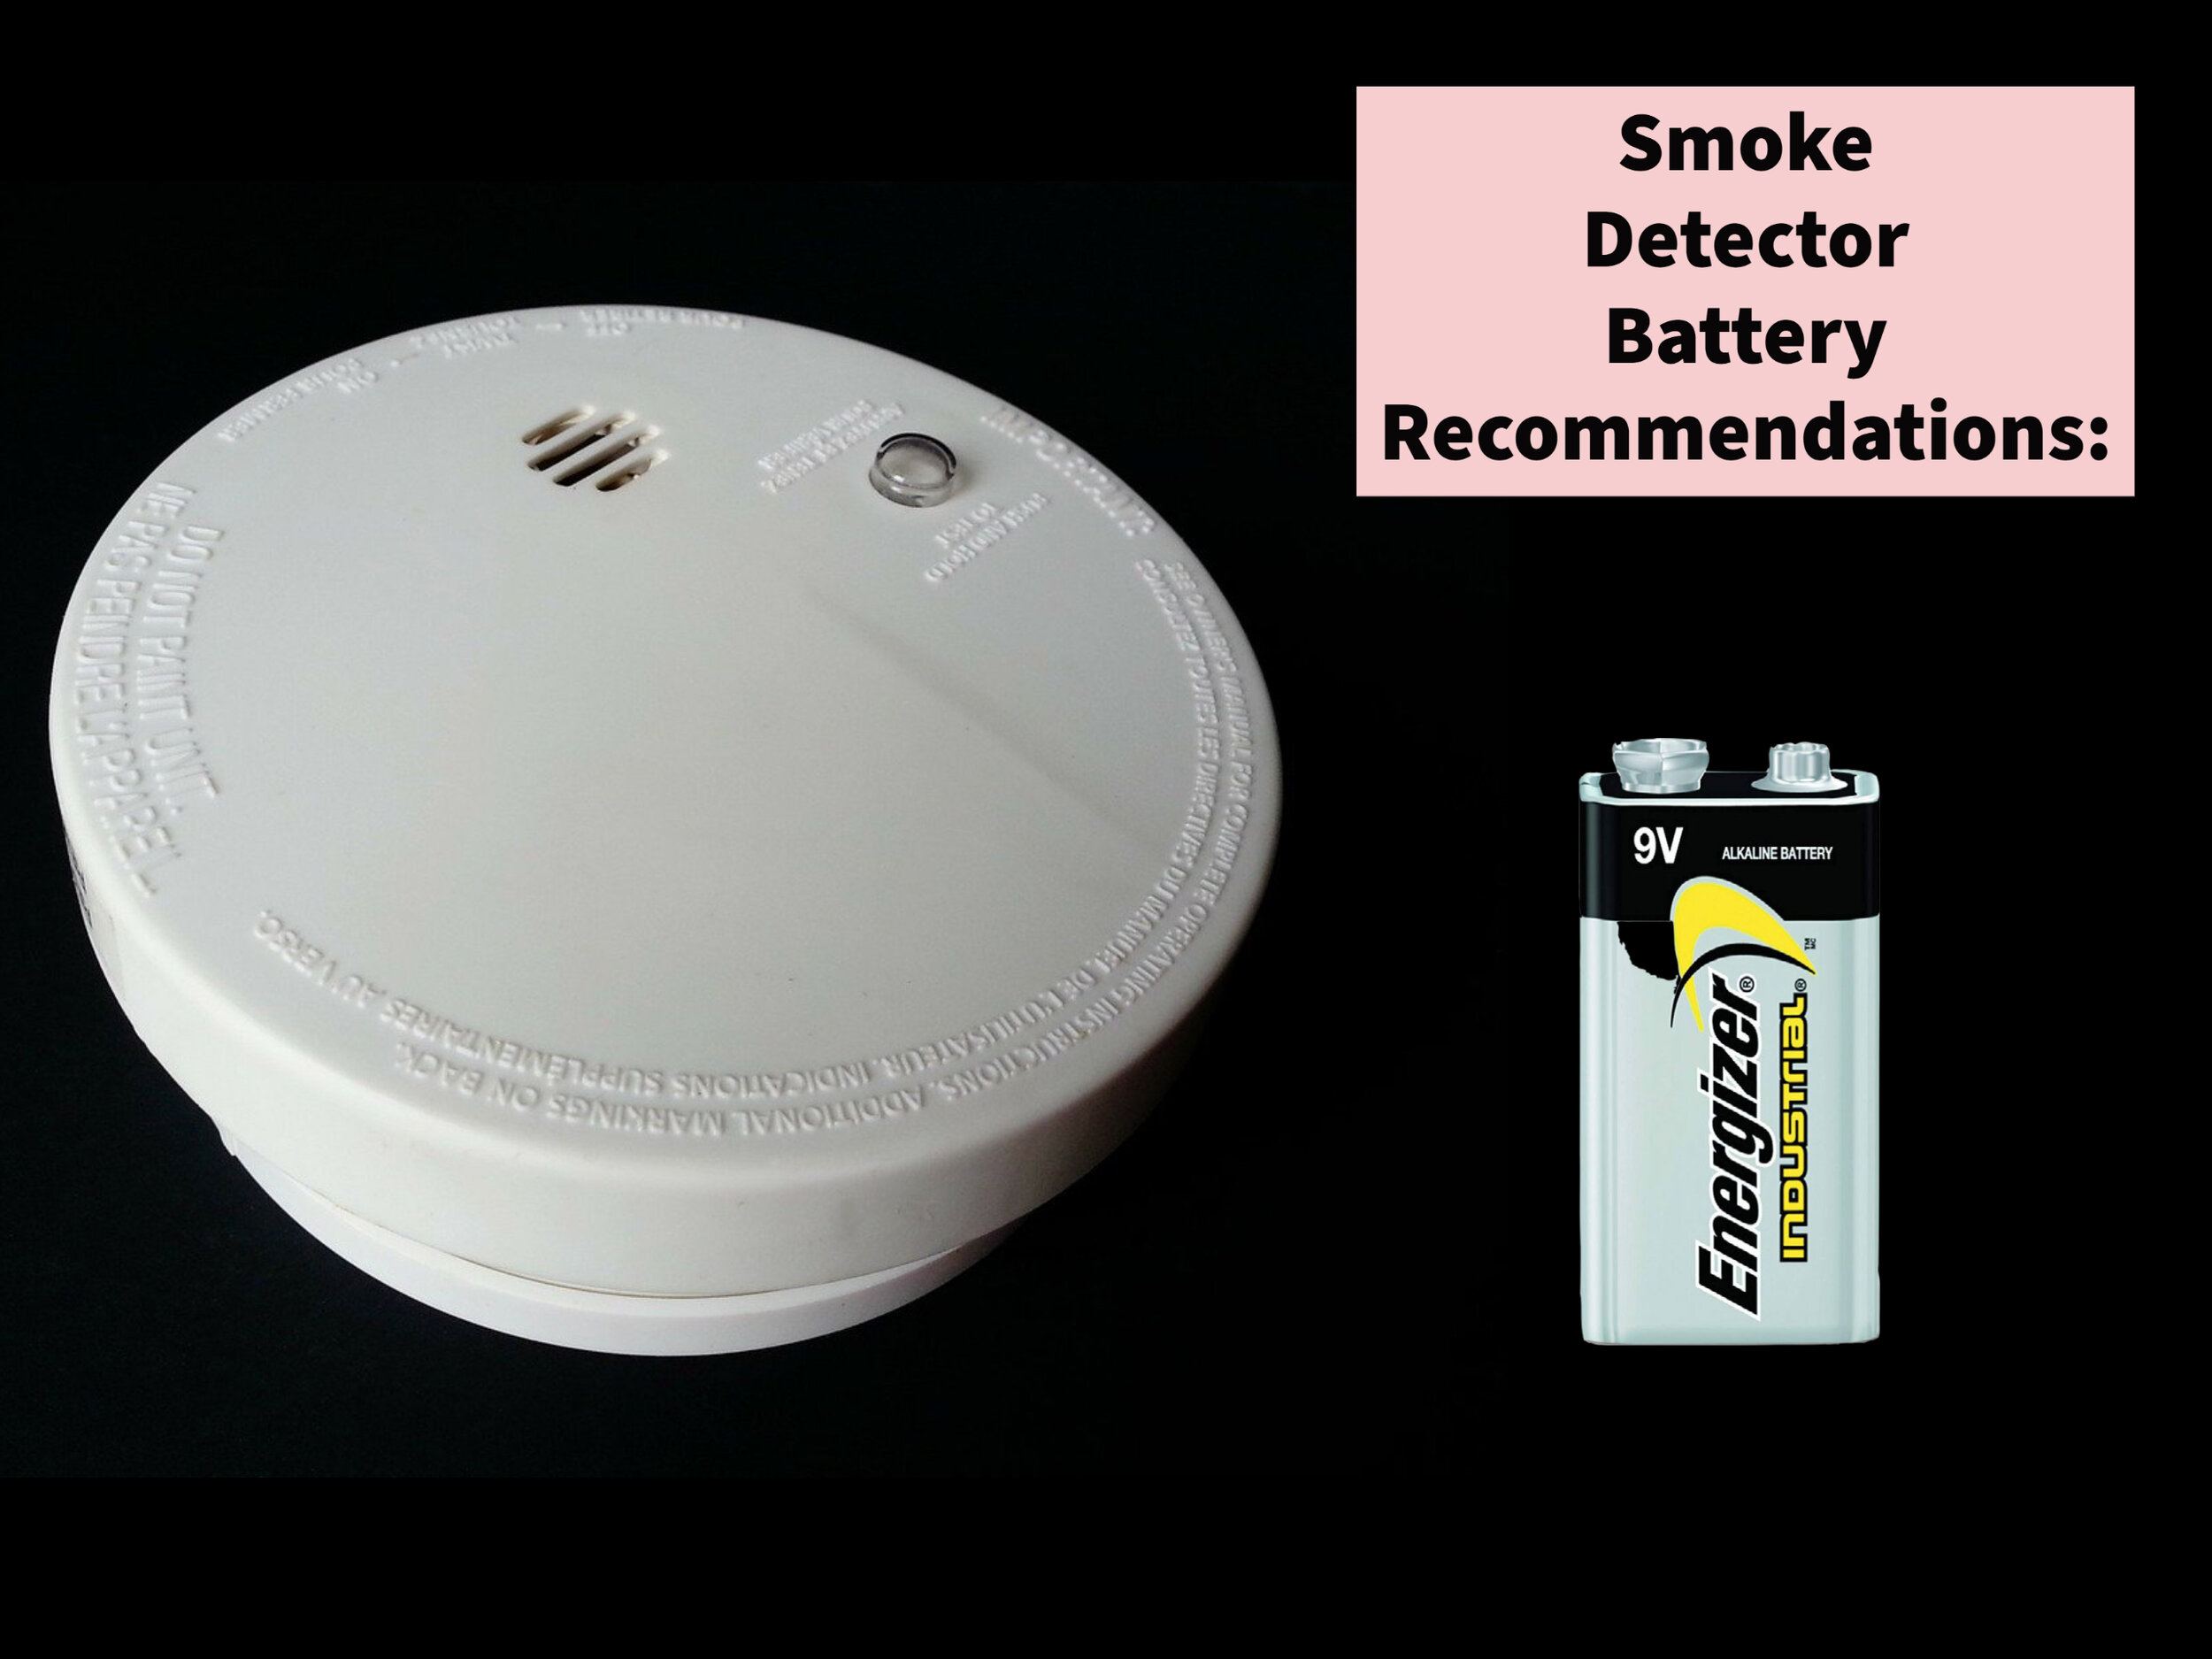 What type of batteries are best for smoke detectors?